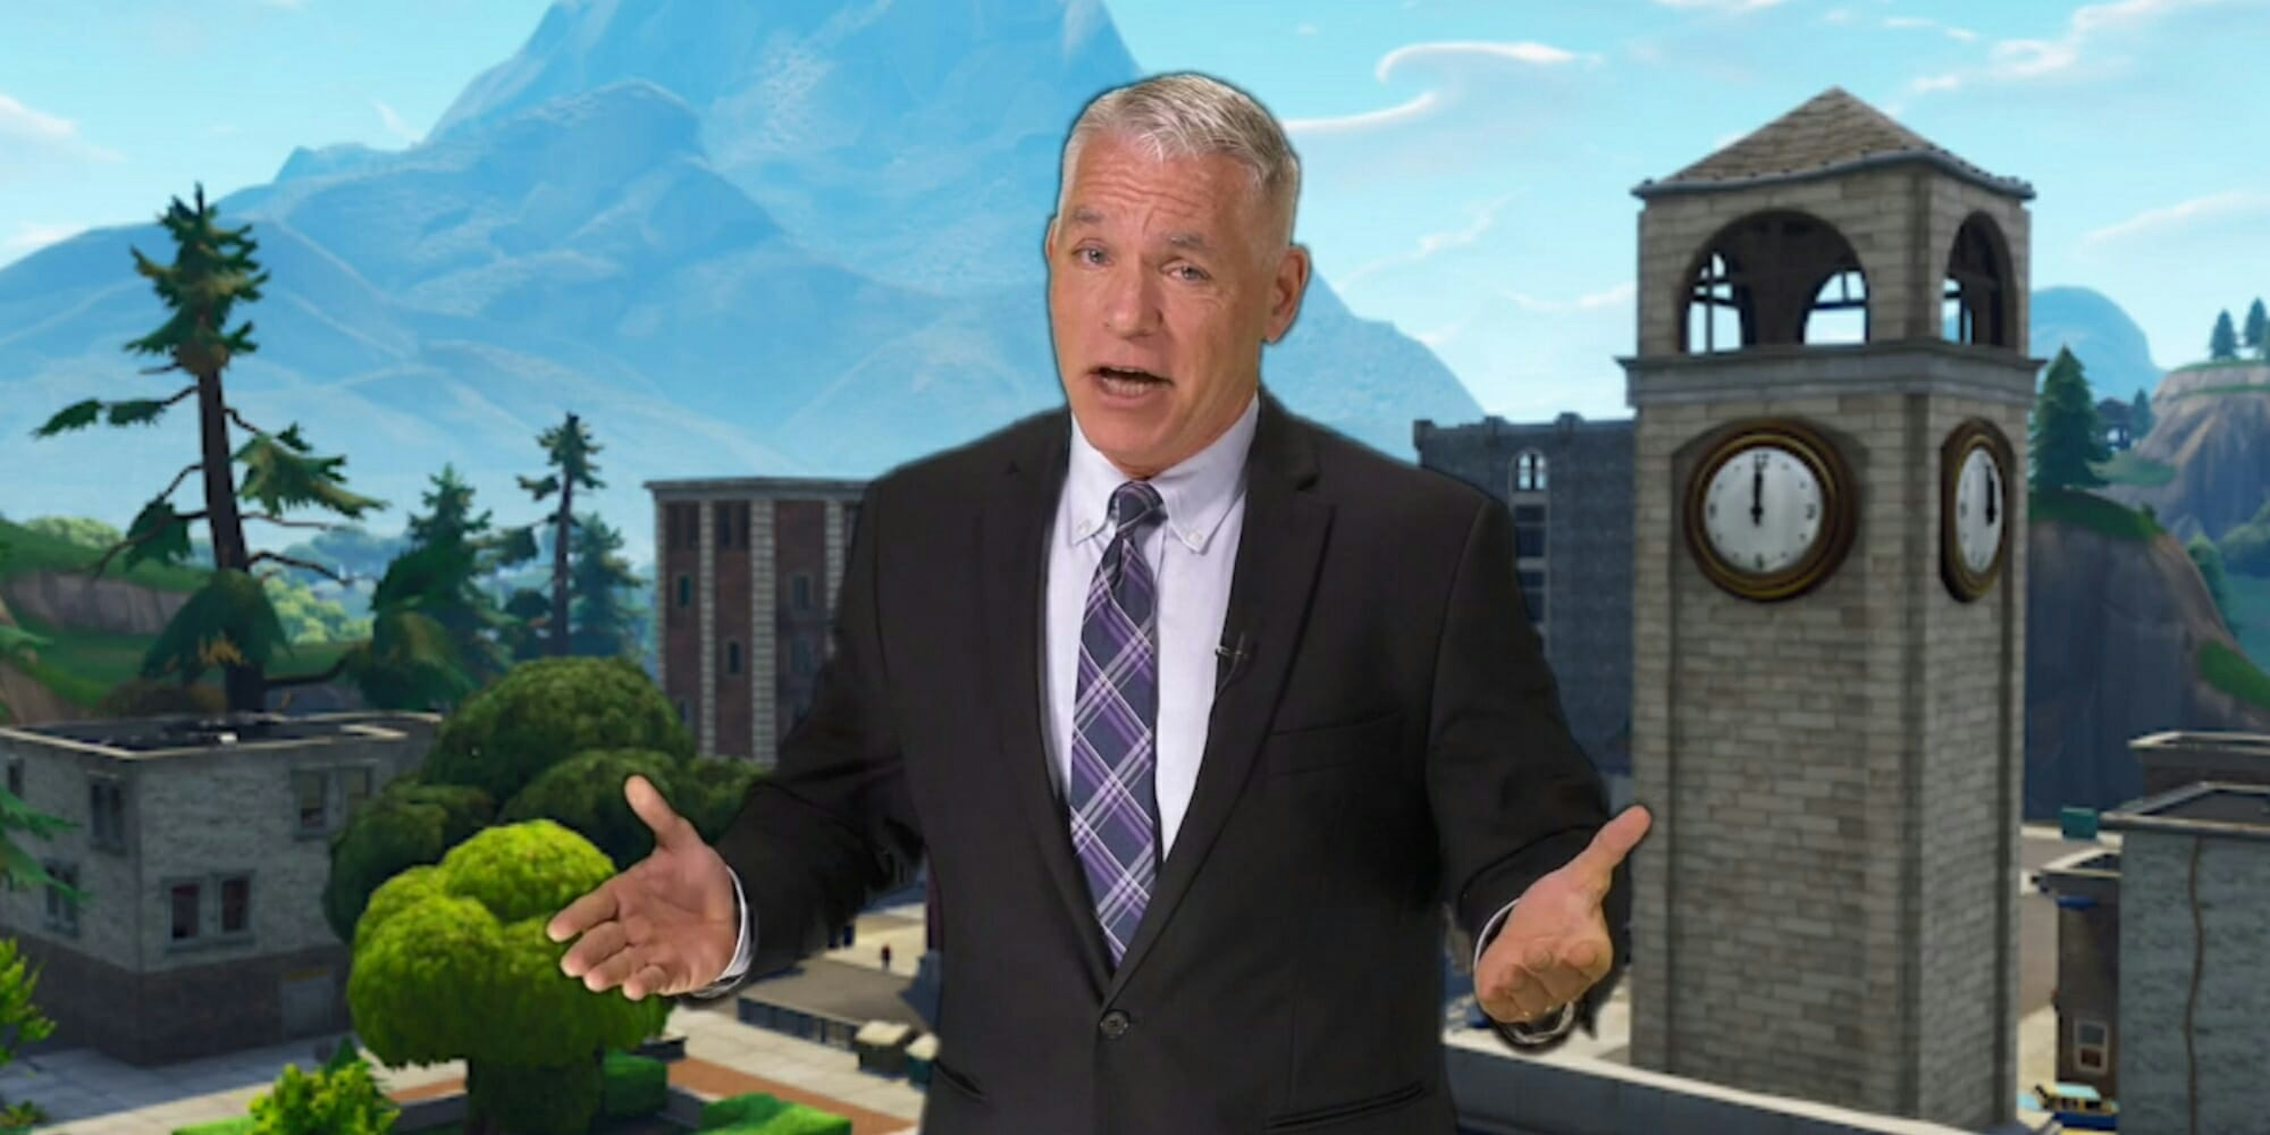 VoiceOverPete records fake credit card scam videos which are trending in the Fortnite community.